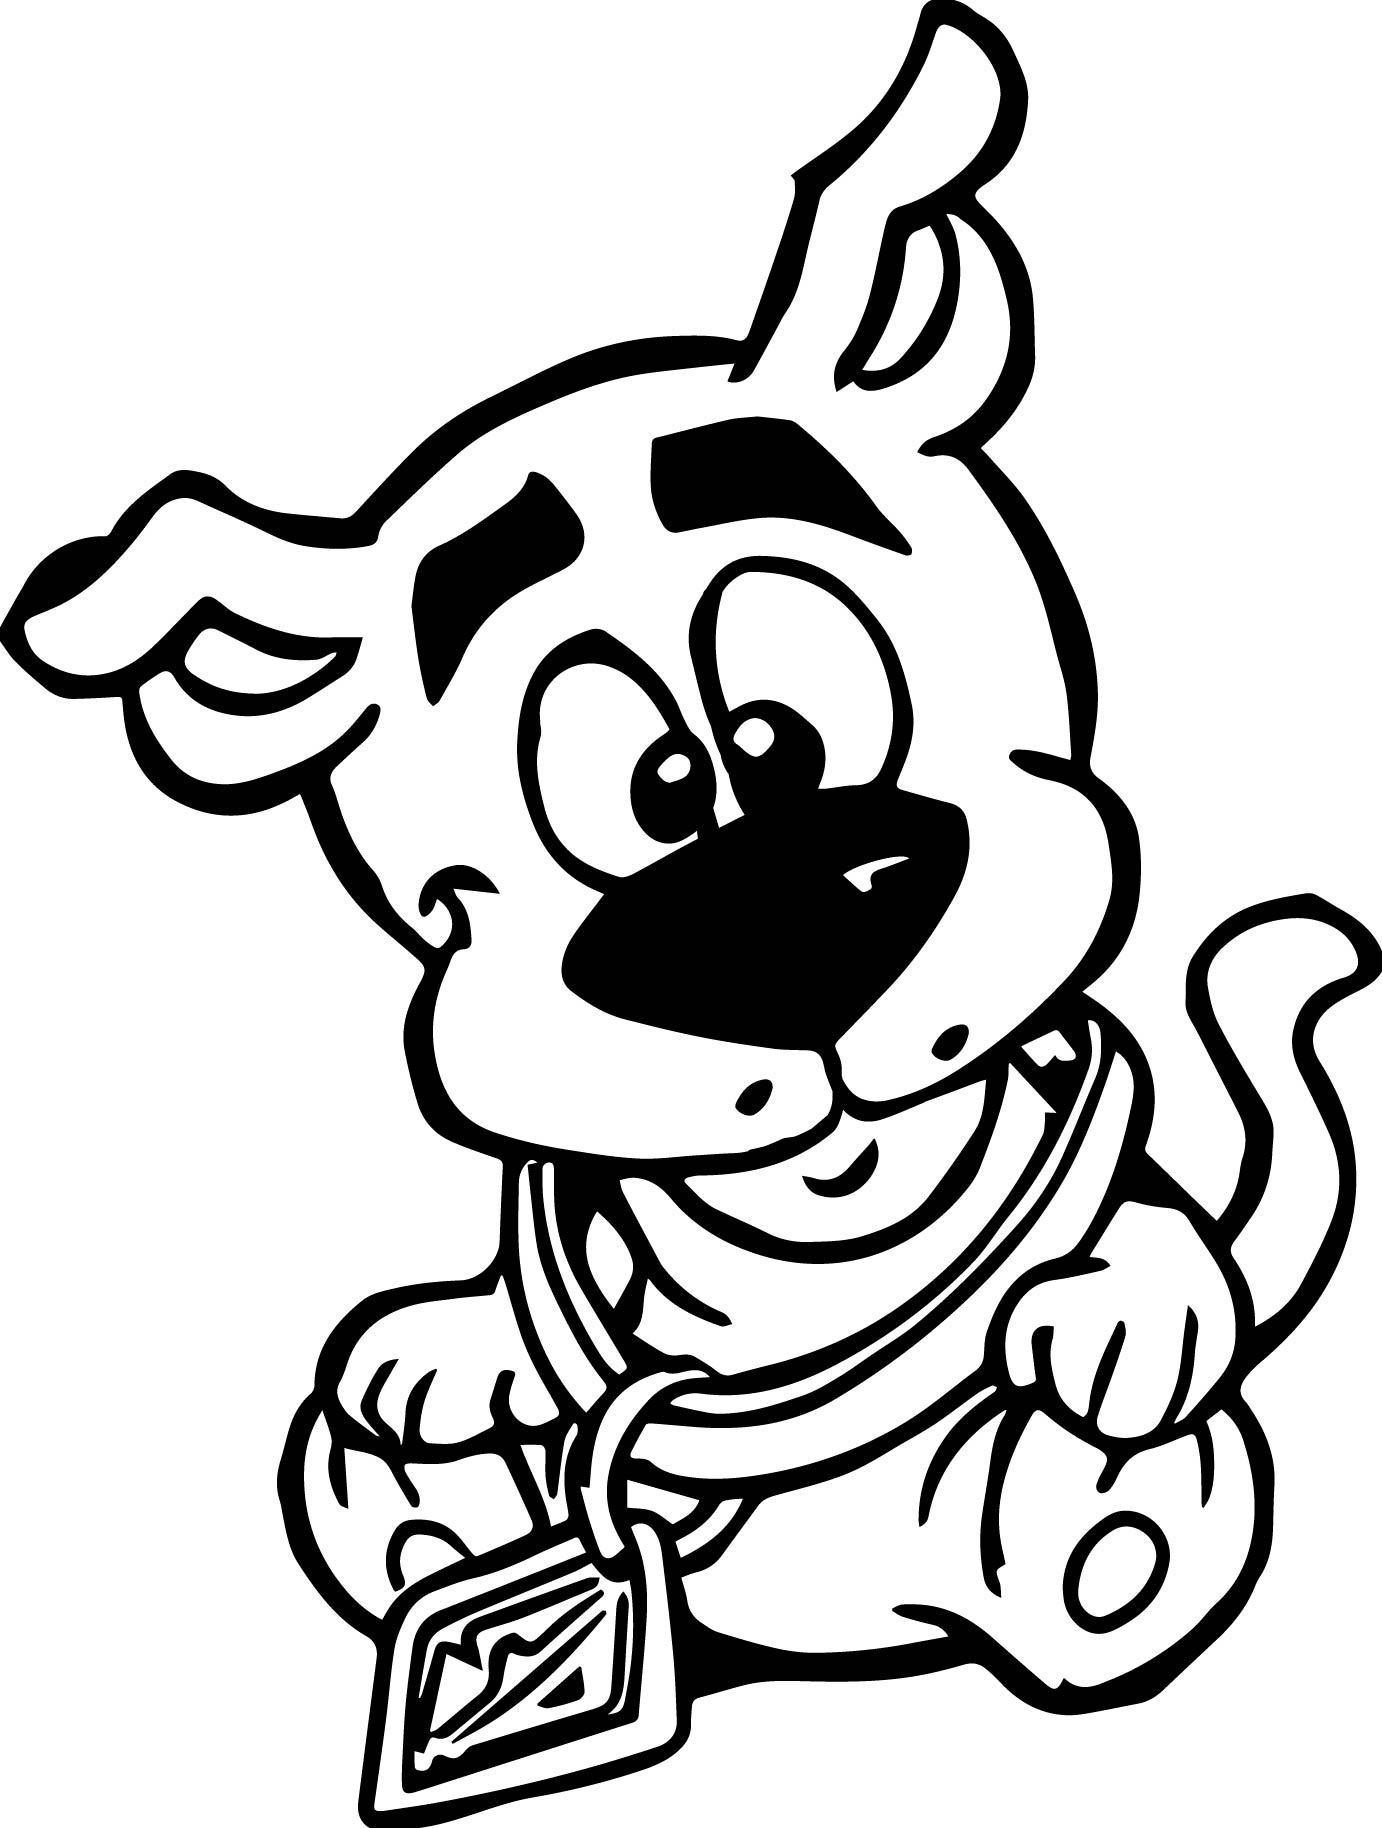 Coloring Sheets For Boys Scooby Doo
 nice Baby Scooby Doo Coloring Page